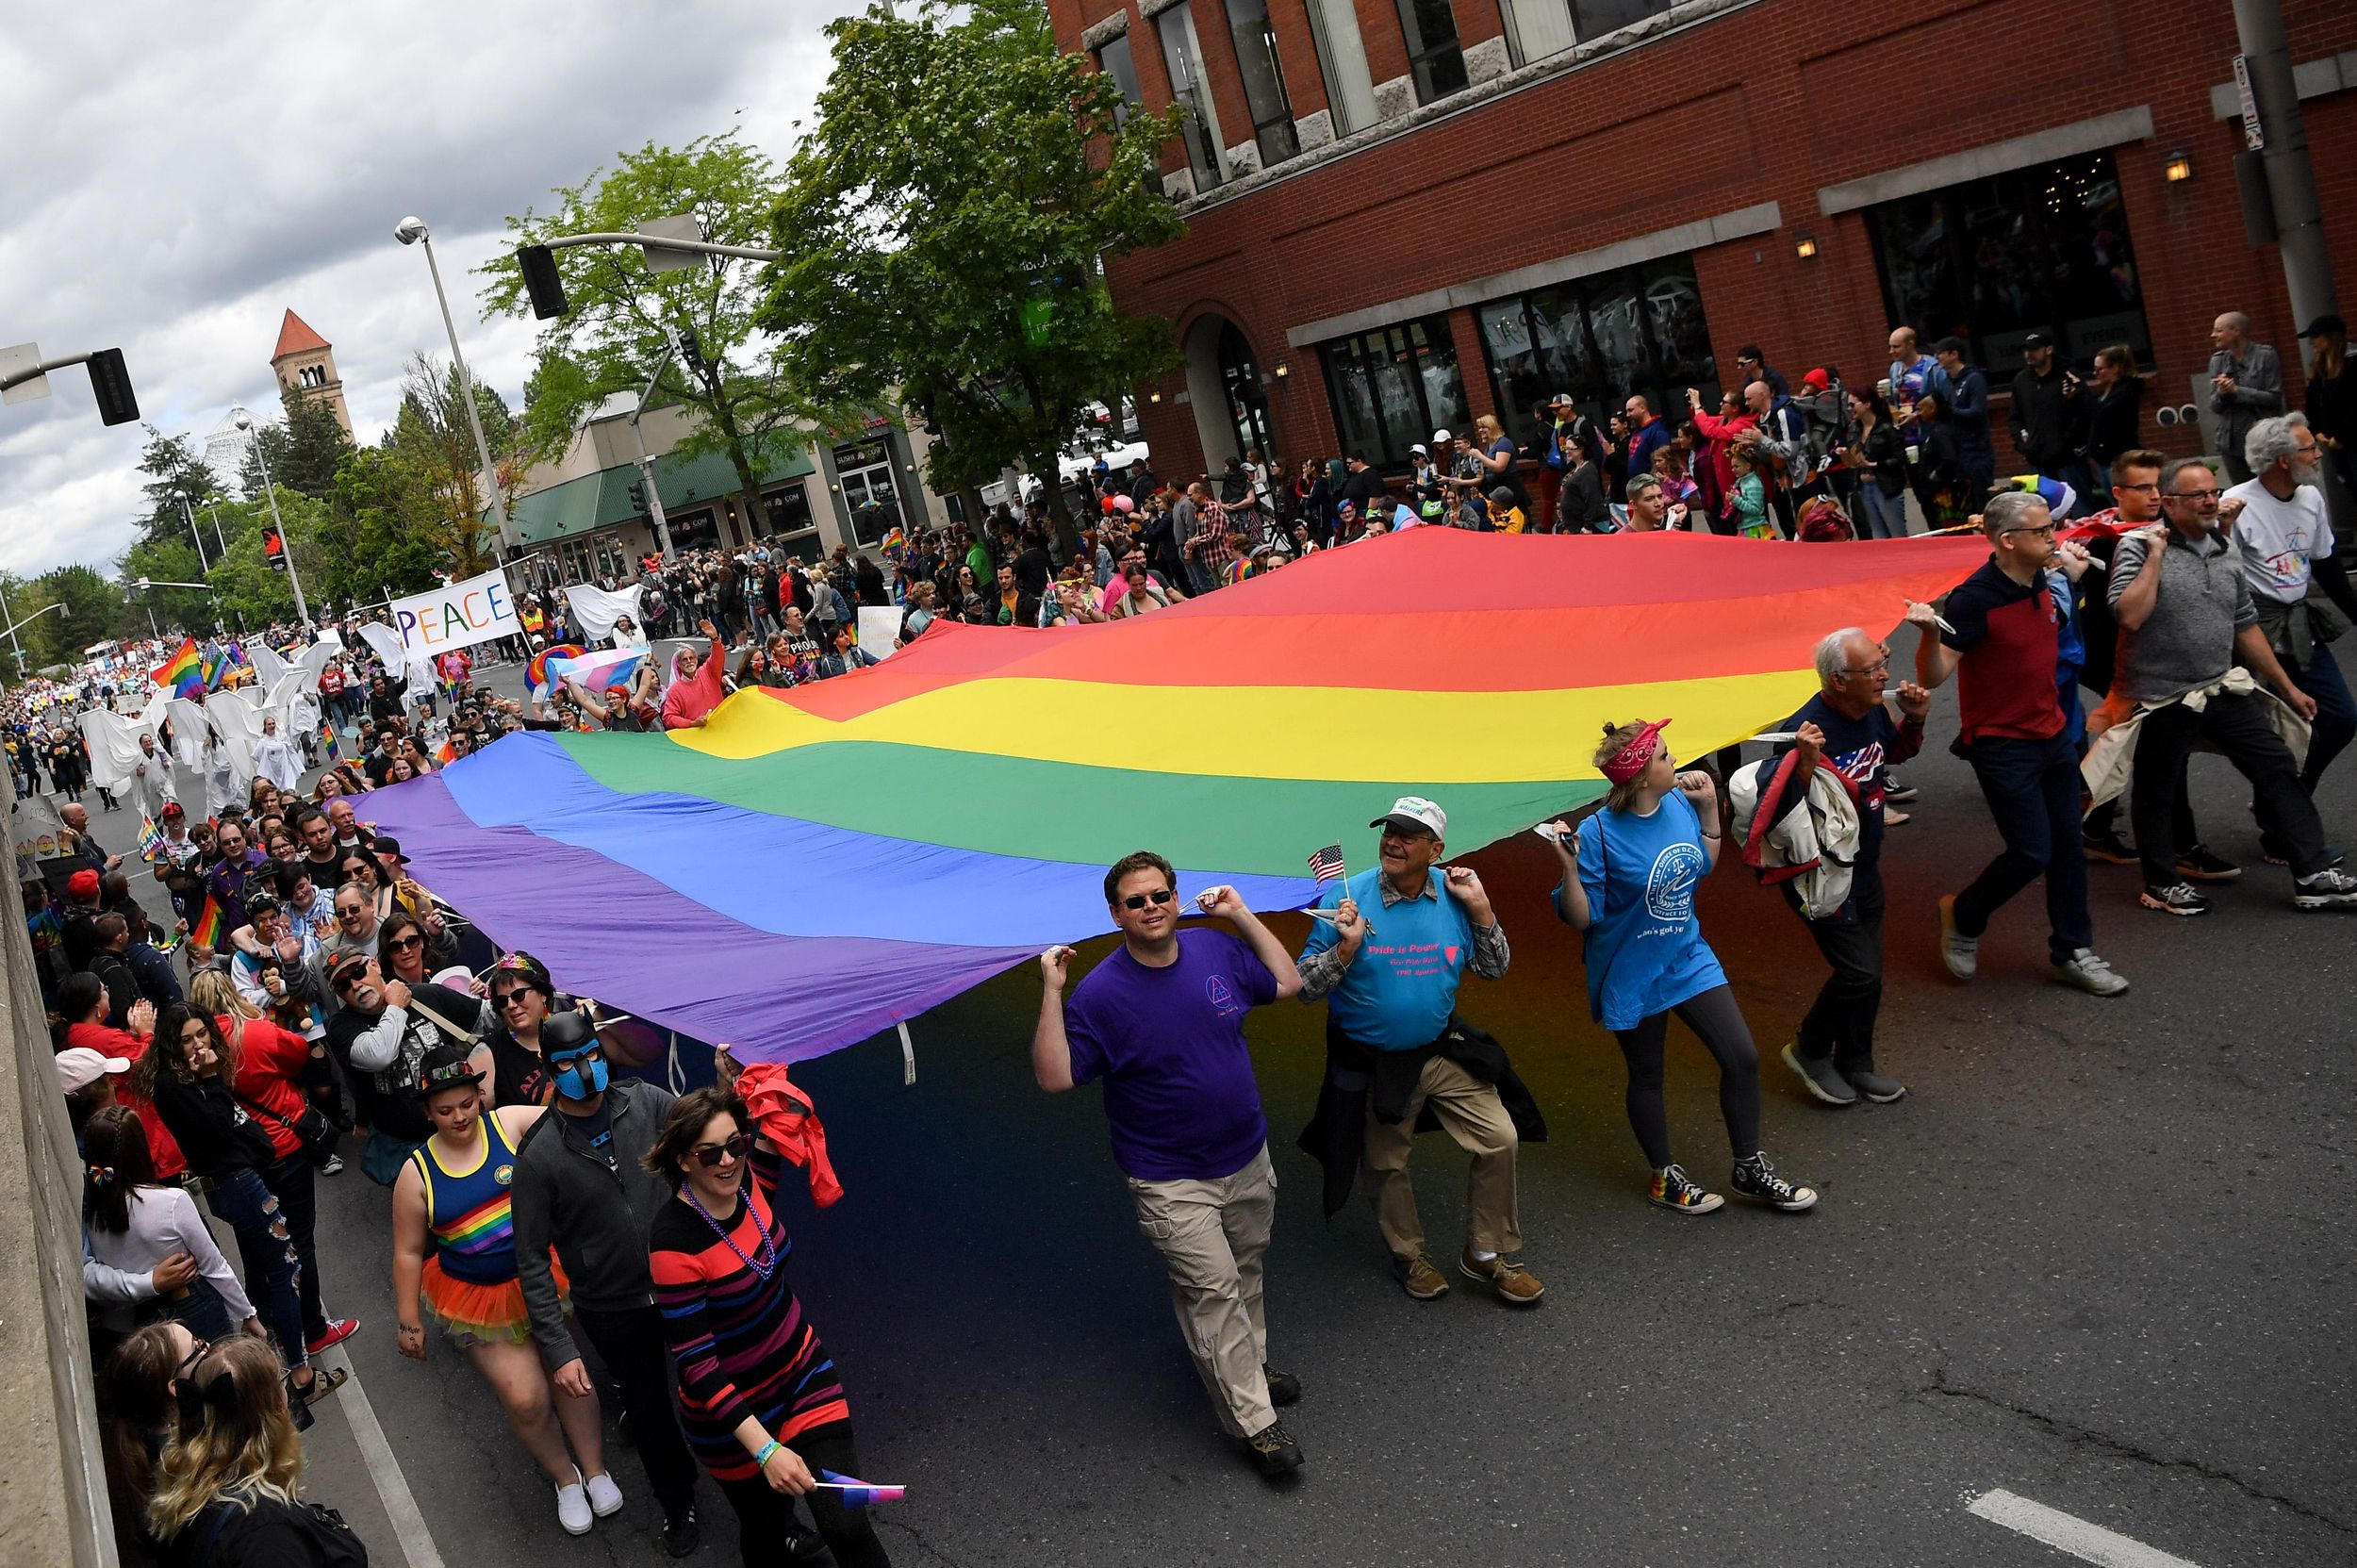 ‘To Thrive, Not Just Survive’ Spokane Pride Parade and Rainbow